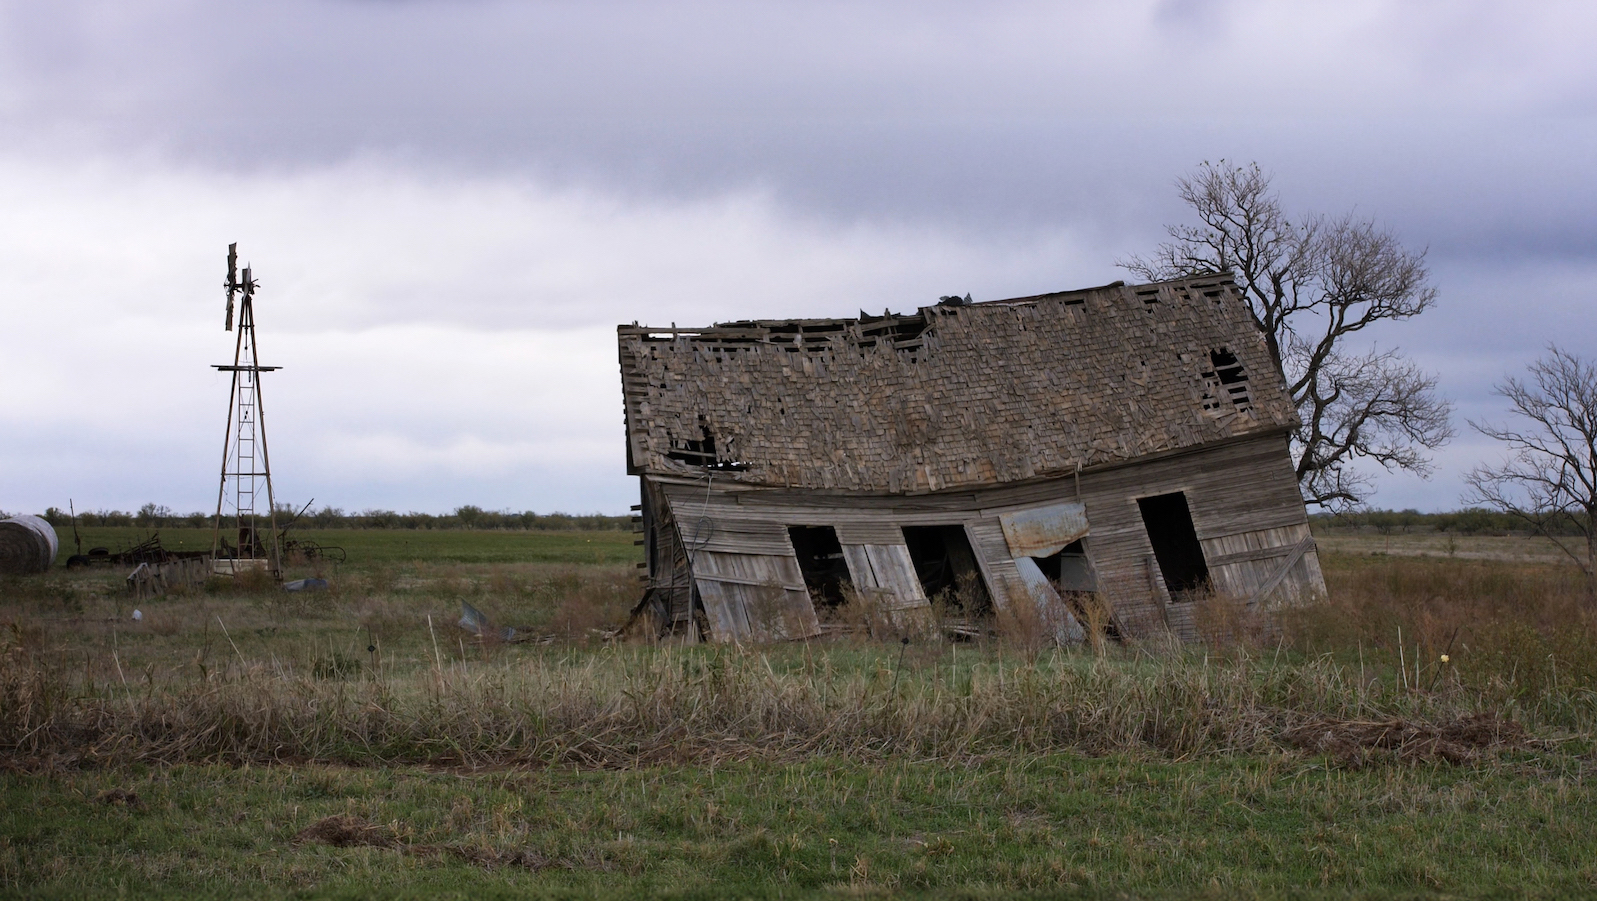 A dilapidated barn leans over in a vast green field